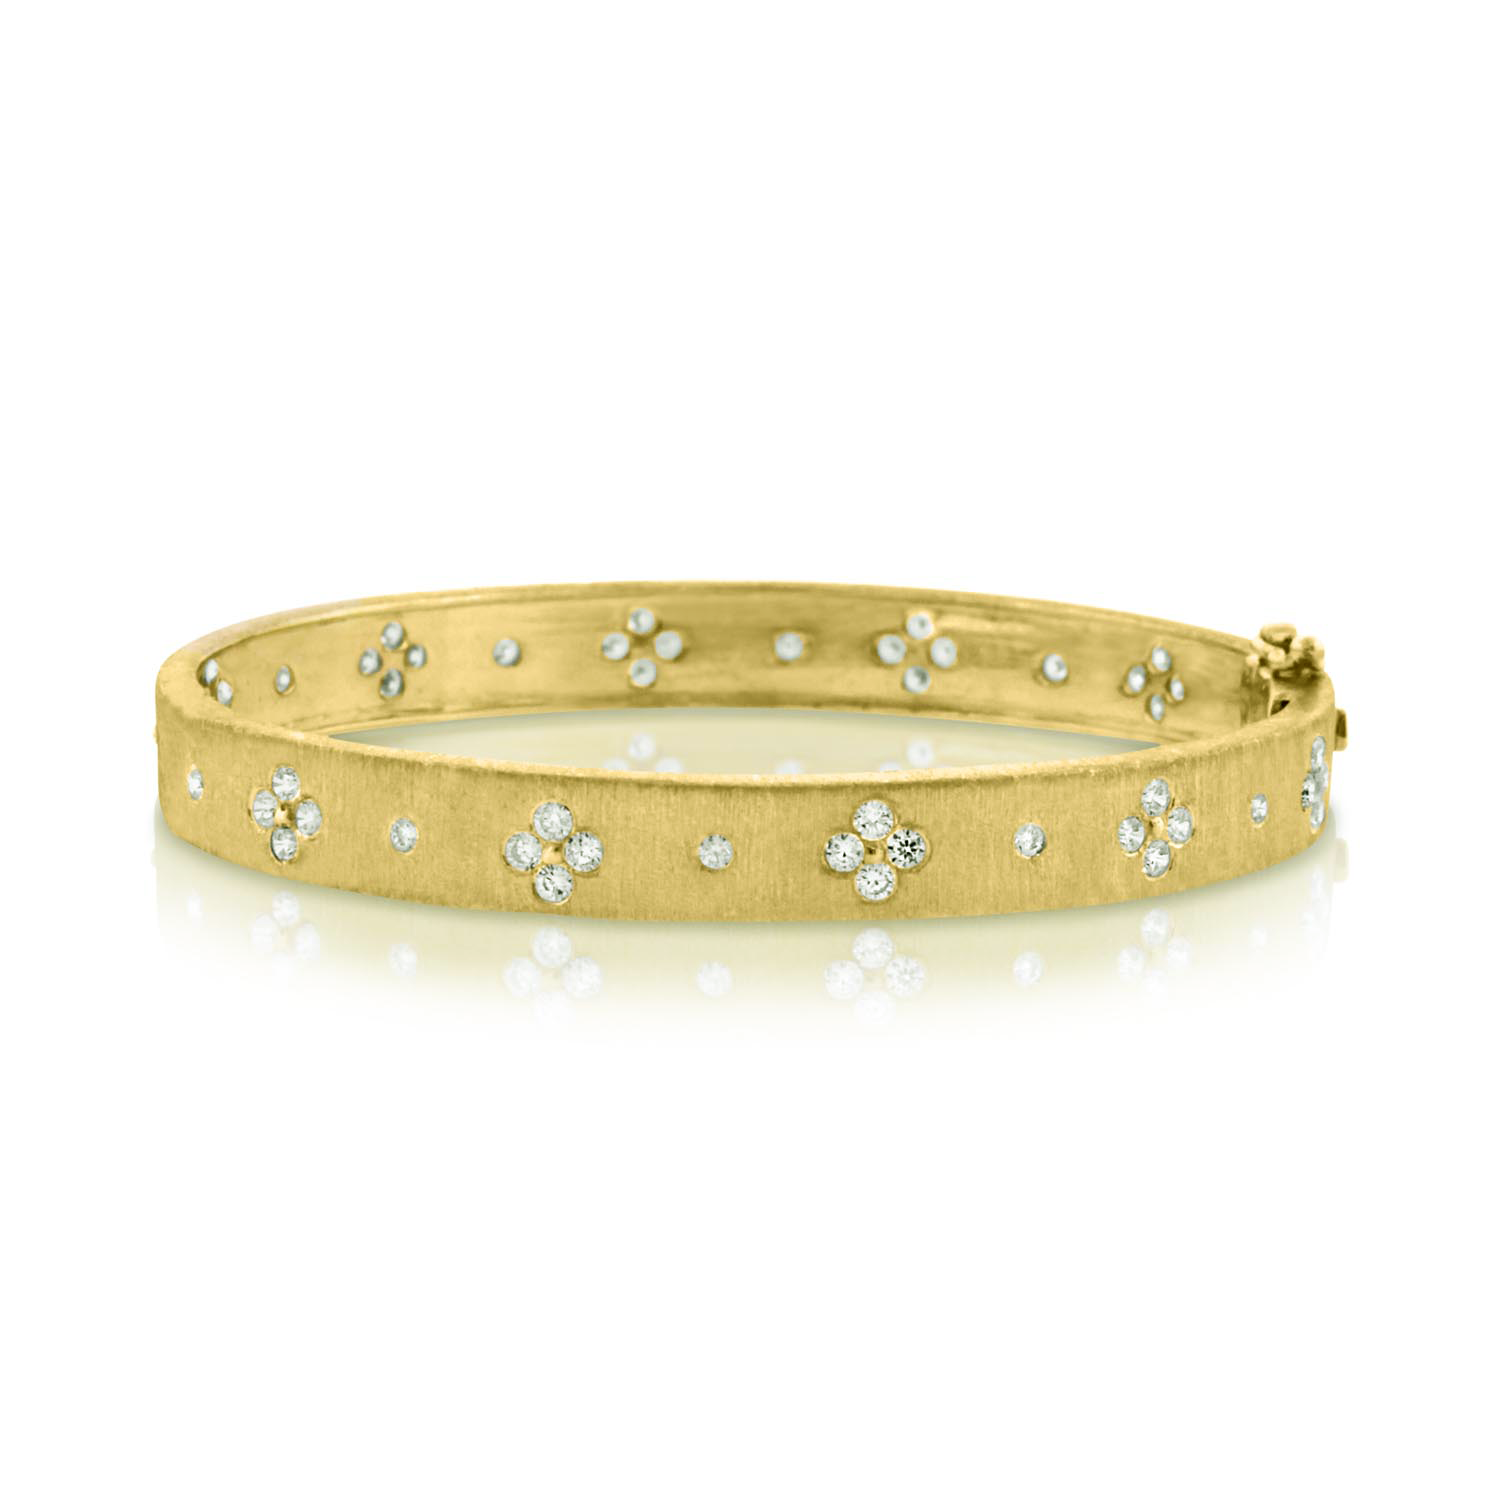 Gold Frosted Bracelet with Clovers